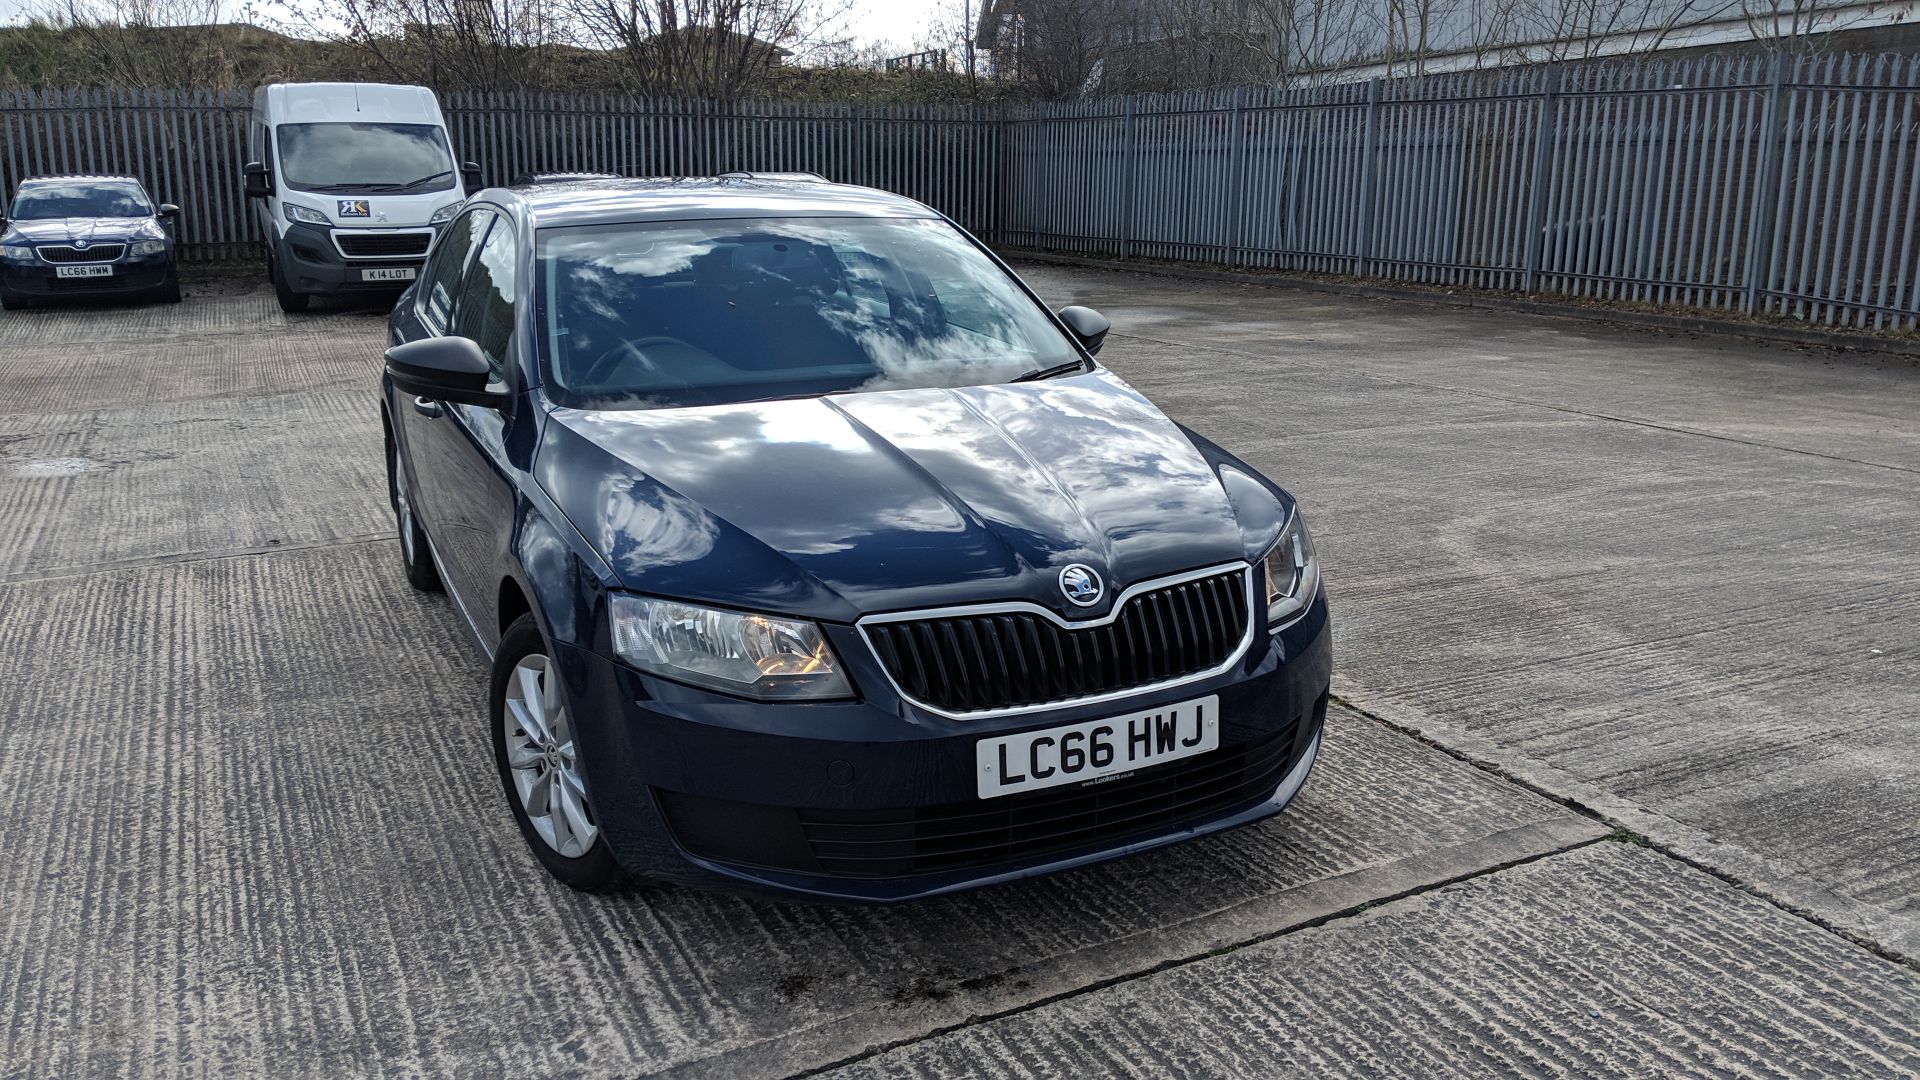 LC66 HWJ Skoda Octavia S TDI S-A 1598cc diesel engine. Colour: Blue. First registered: 06.02.17. - Image 51 of 52